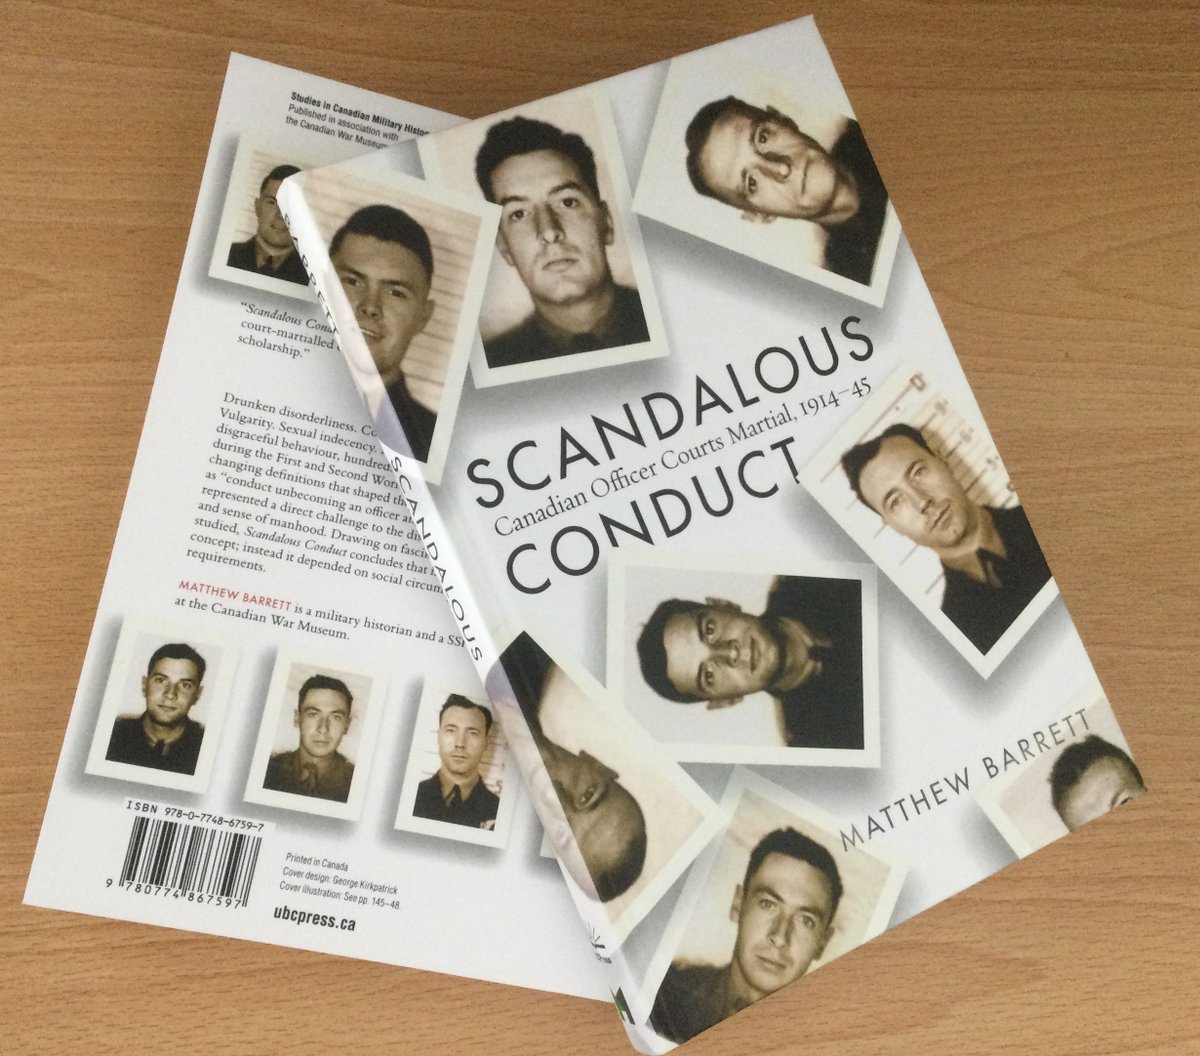 My book, Scandalous Conduct, studies how the Canadian army defined dishonourable actions through both world wars and used disciplinary and legal measures to expel perceived offenders of an often ambiguous honour code.
#HistoryWritersDay22